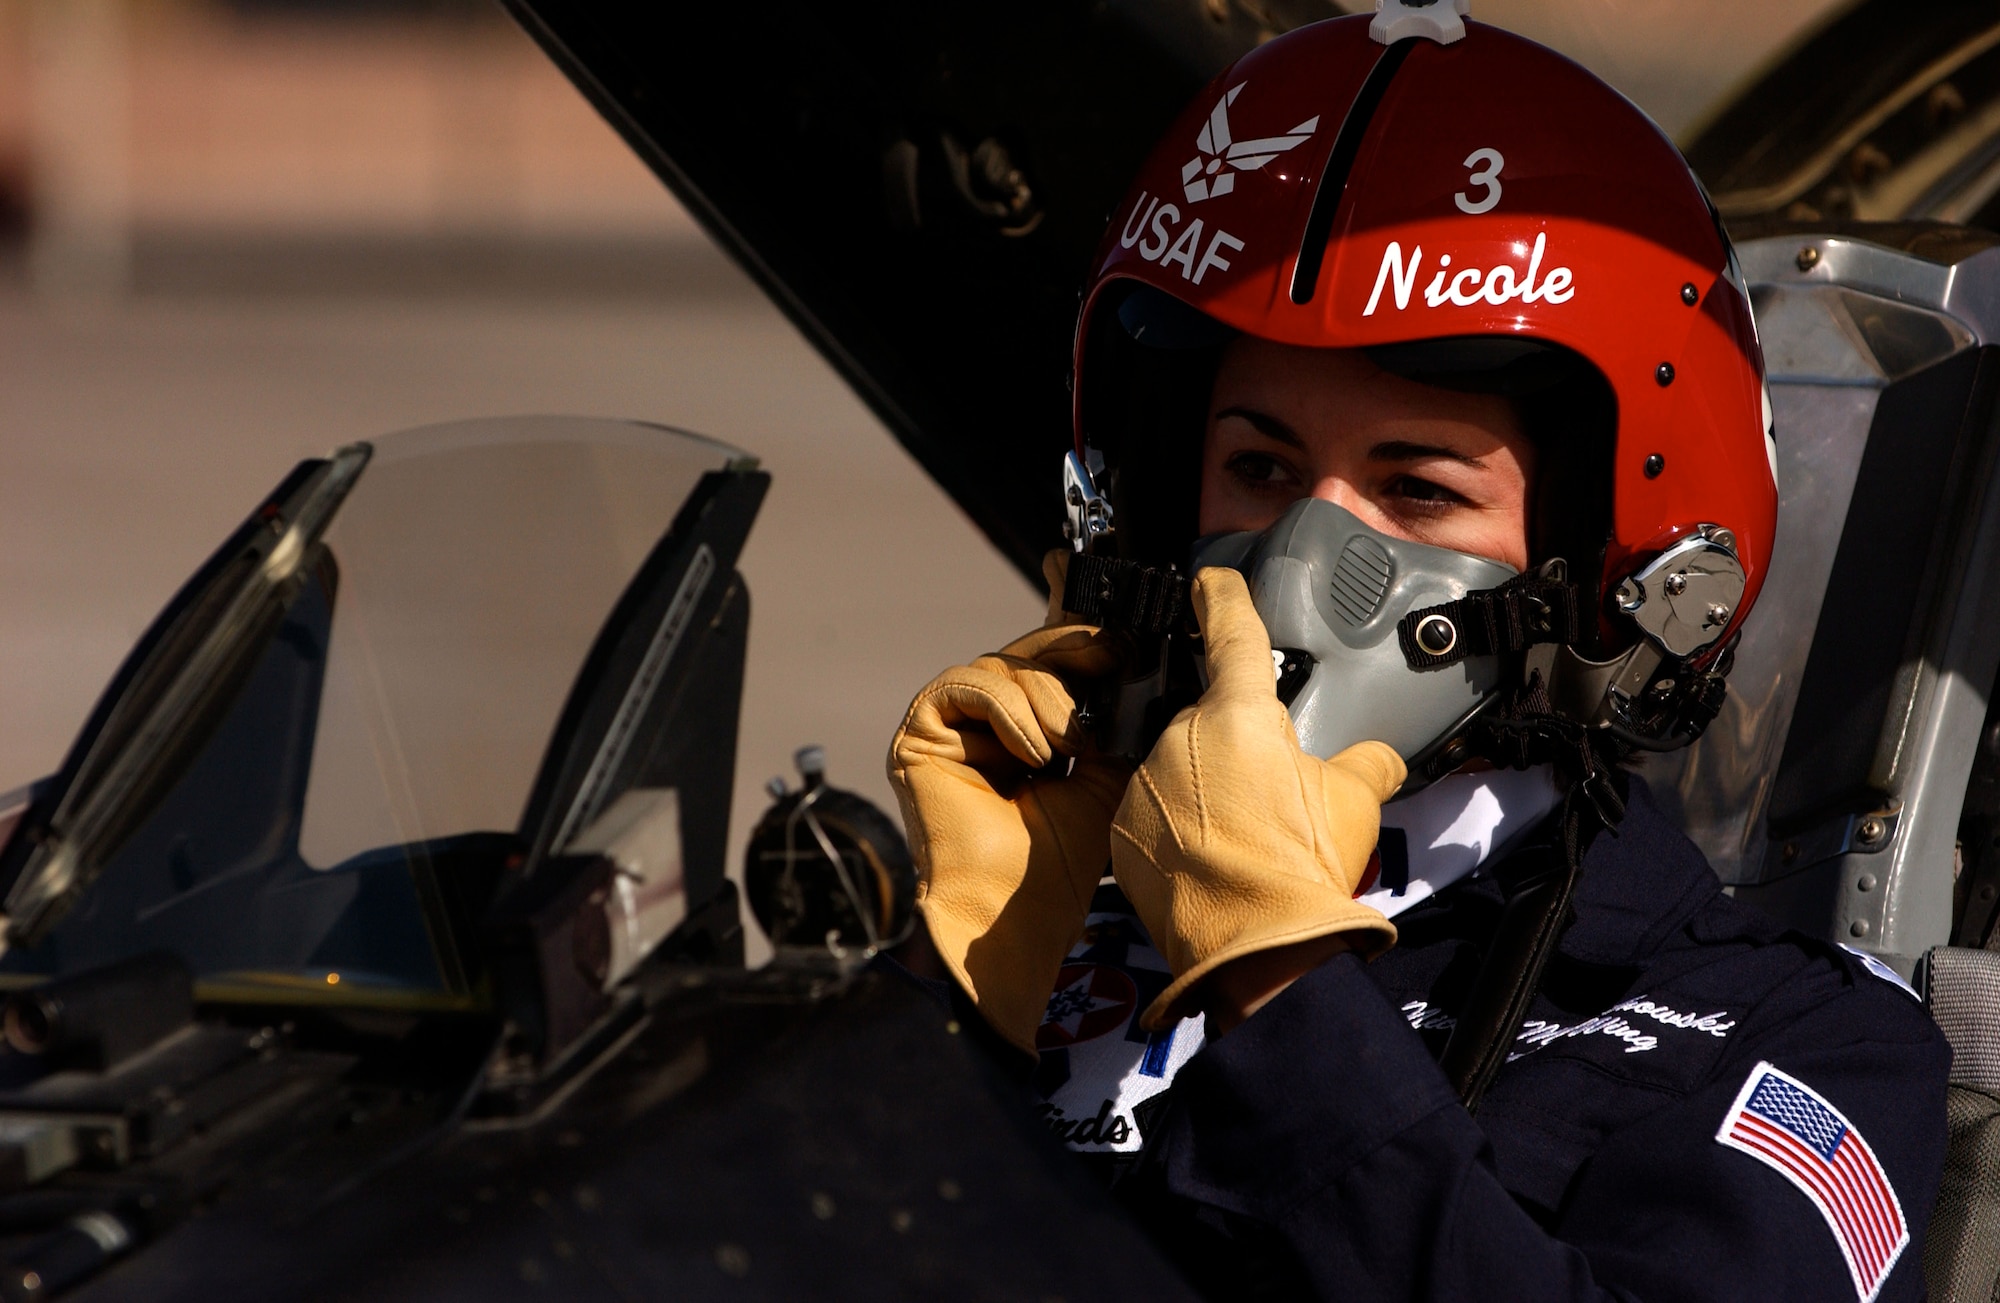 Maj. Nicole Malachowski prepares to take off for a practice sortie with the Thunderbirds in an F-16 Fighting Falcon. Major Malachowski is the Thunderbird #3 right wing pilot and just finished her two-year tour with the Air Force Demonstration Squadron. (U.S. Air Force photo/Tech. Sgt. Justin Pyle) 
